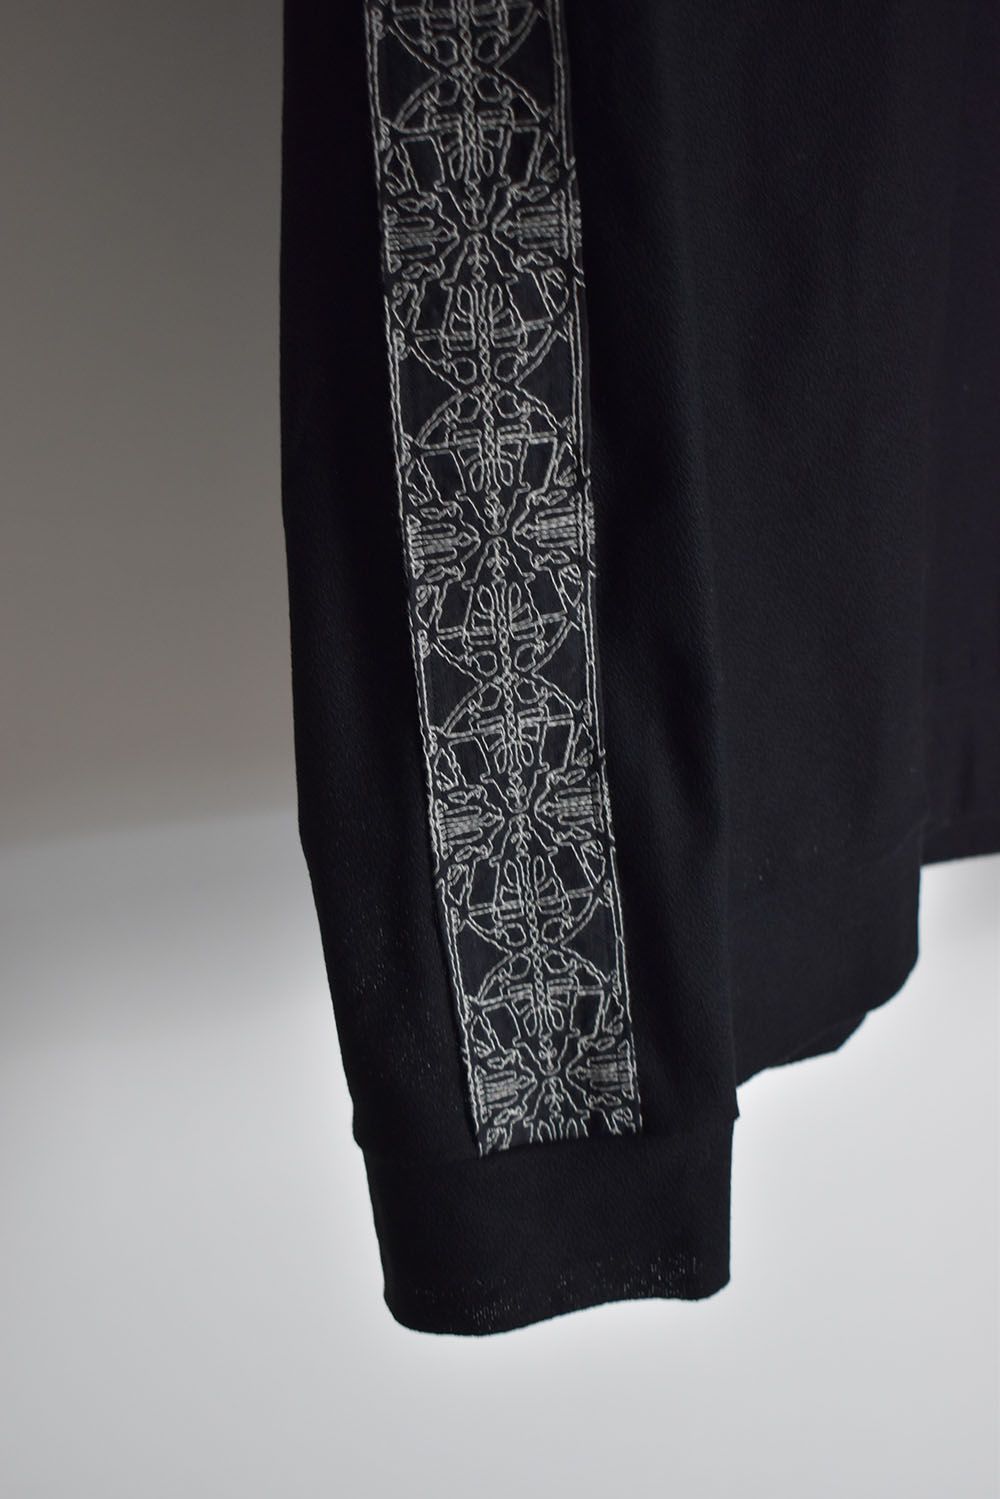 Embroidery Knit Long Sleeve Tee"Black"/刺繍ニットロングスリーブTee"ブラック"